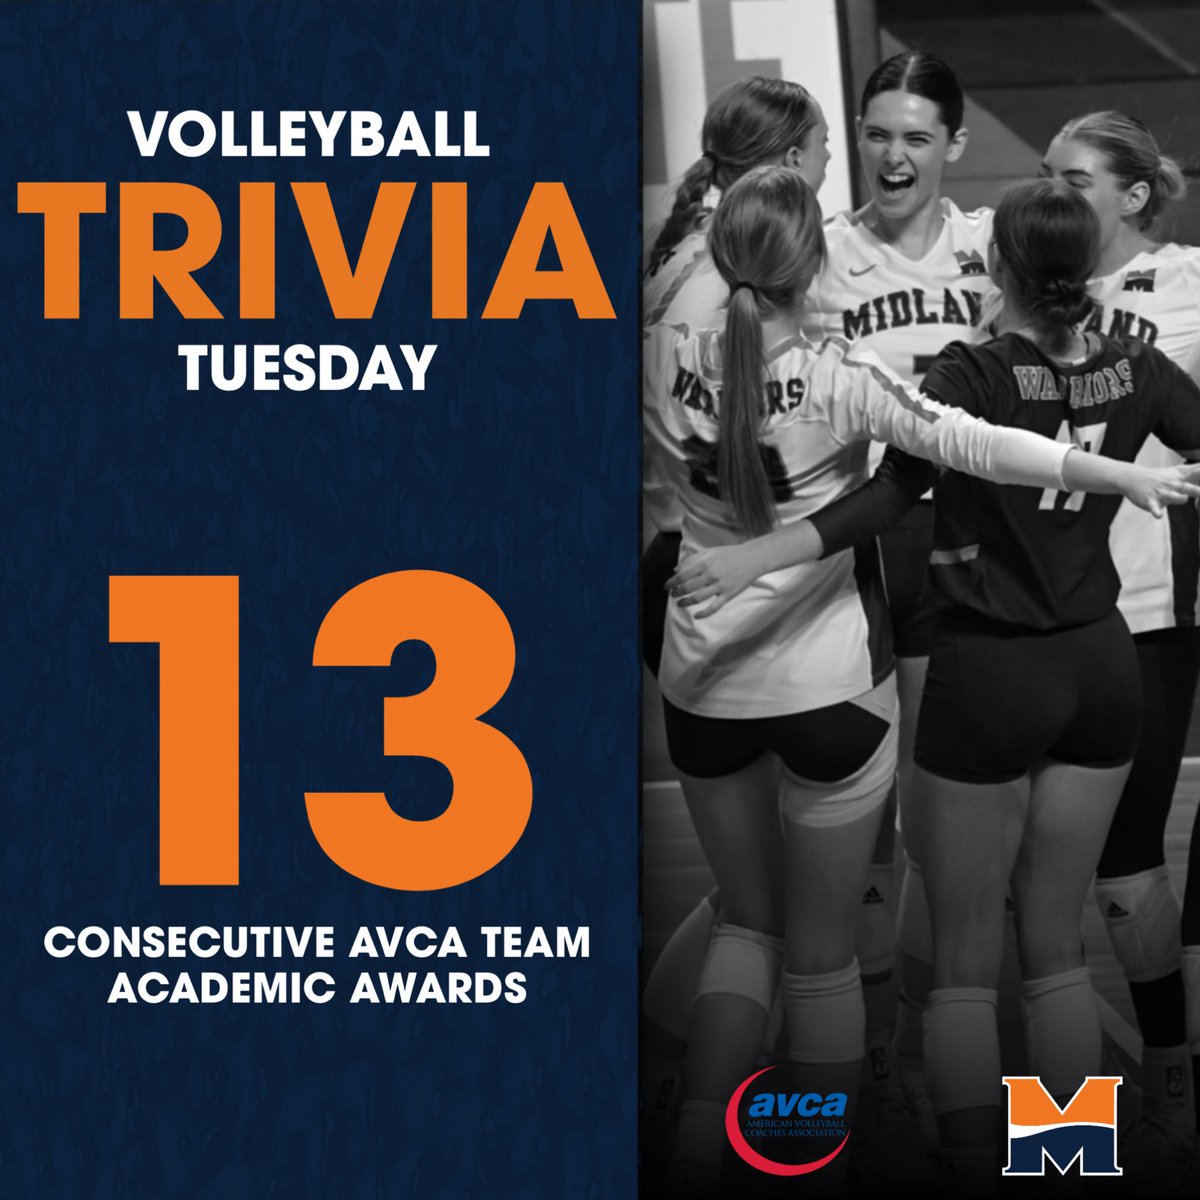 STUDENT-athletes, always. 📚📝 Midland Volleyball has earned the AVCA Team Academic Award every season under Coach Giesselmann since 2010, which requires a team to maintain a cumulative GPA of 3.3 or higher during an academic year. Efforts in the classroom MATTER!